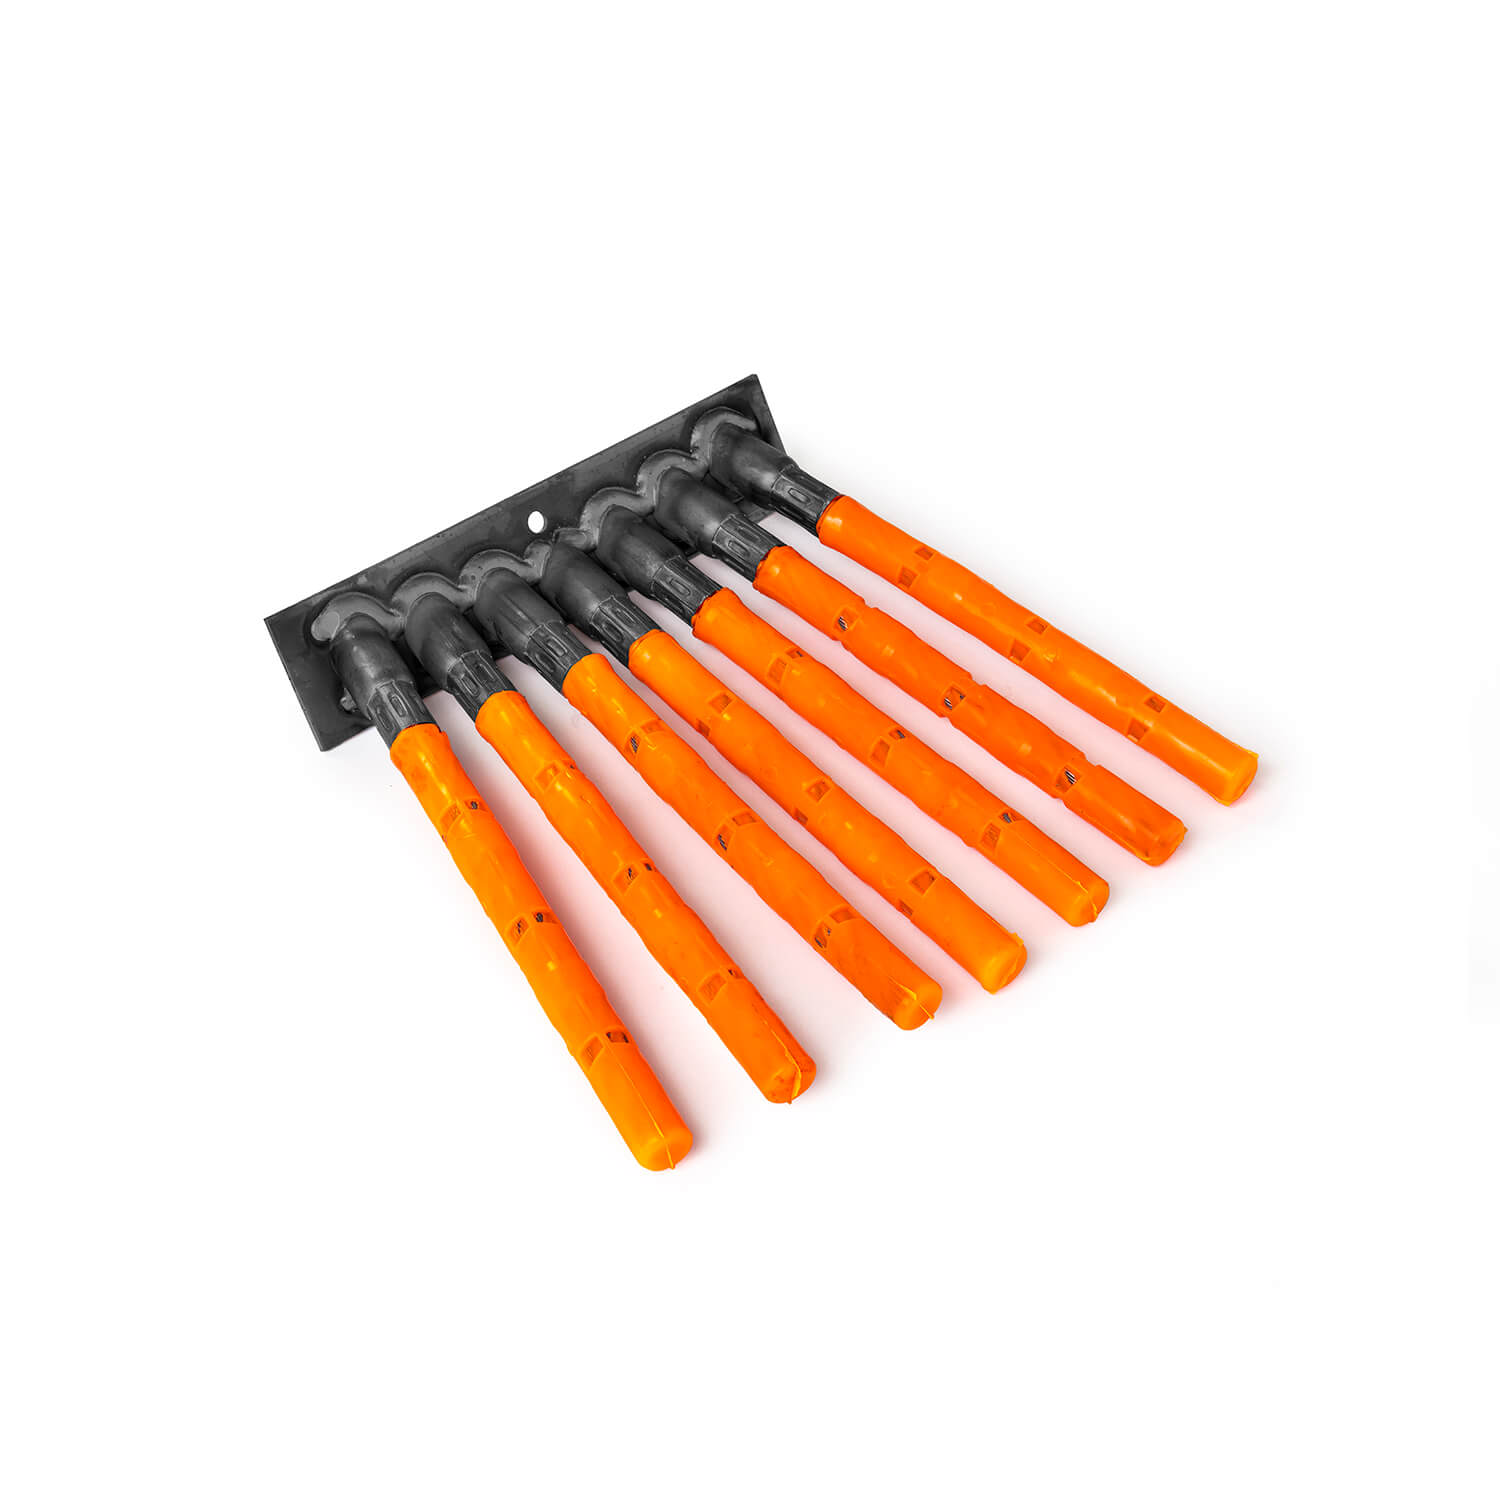 Sweeping and cleaning brushes - KOTI - Industrial and Technical Brushes